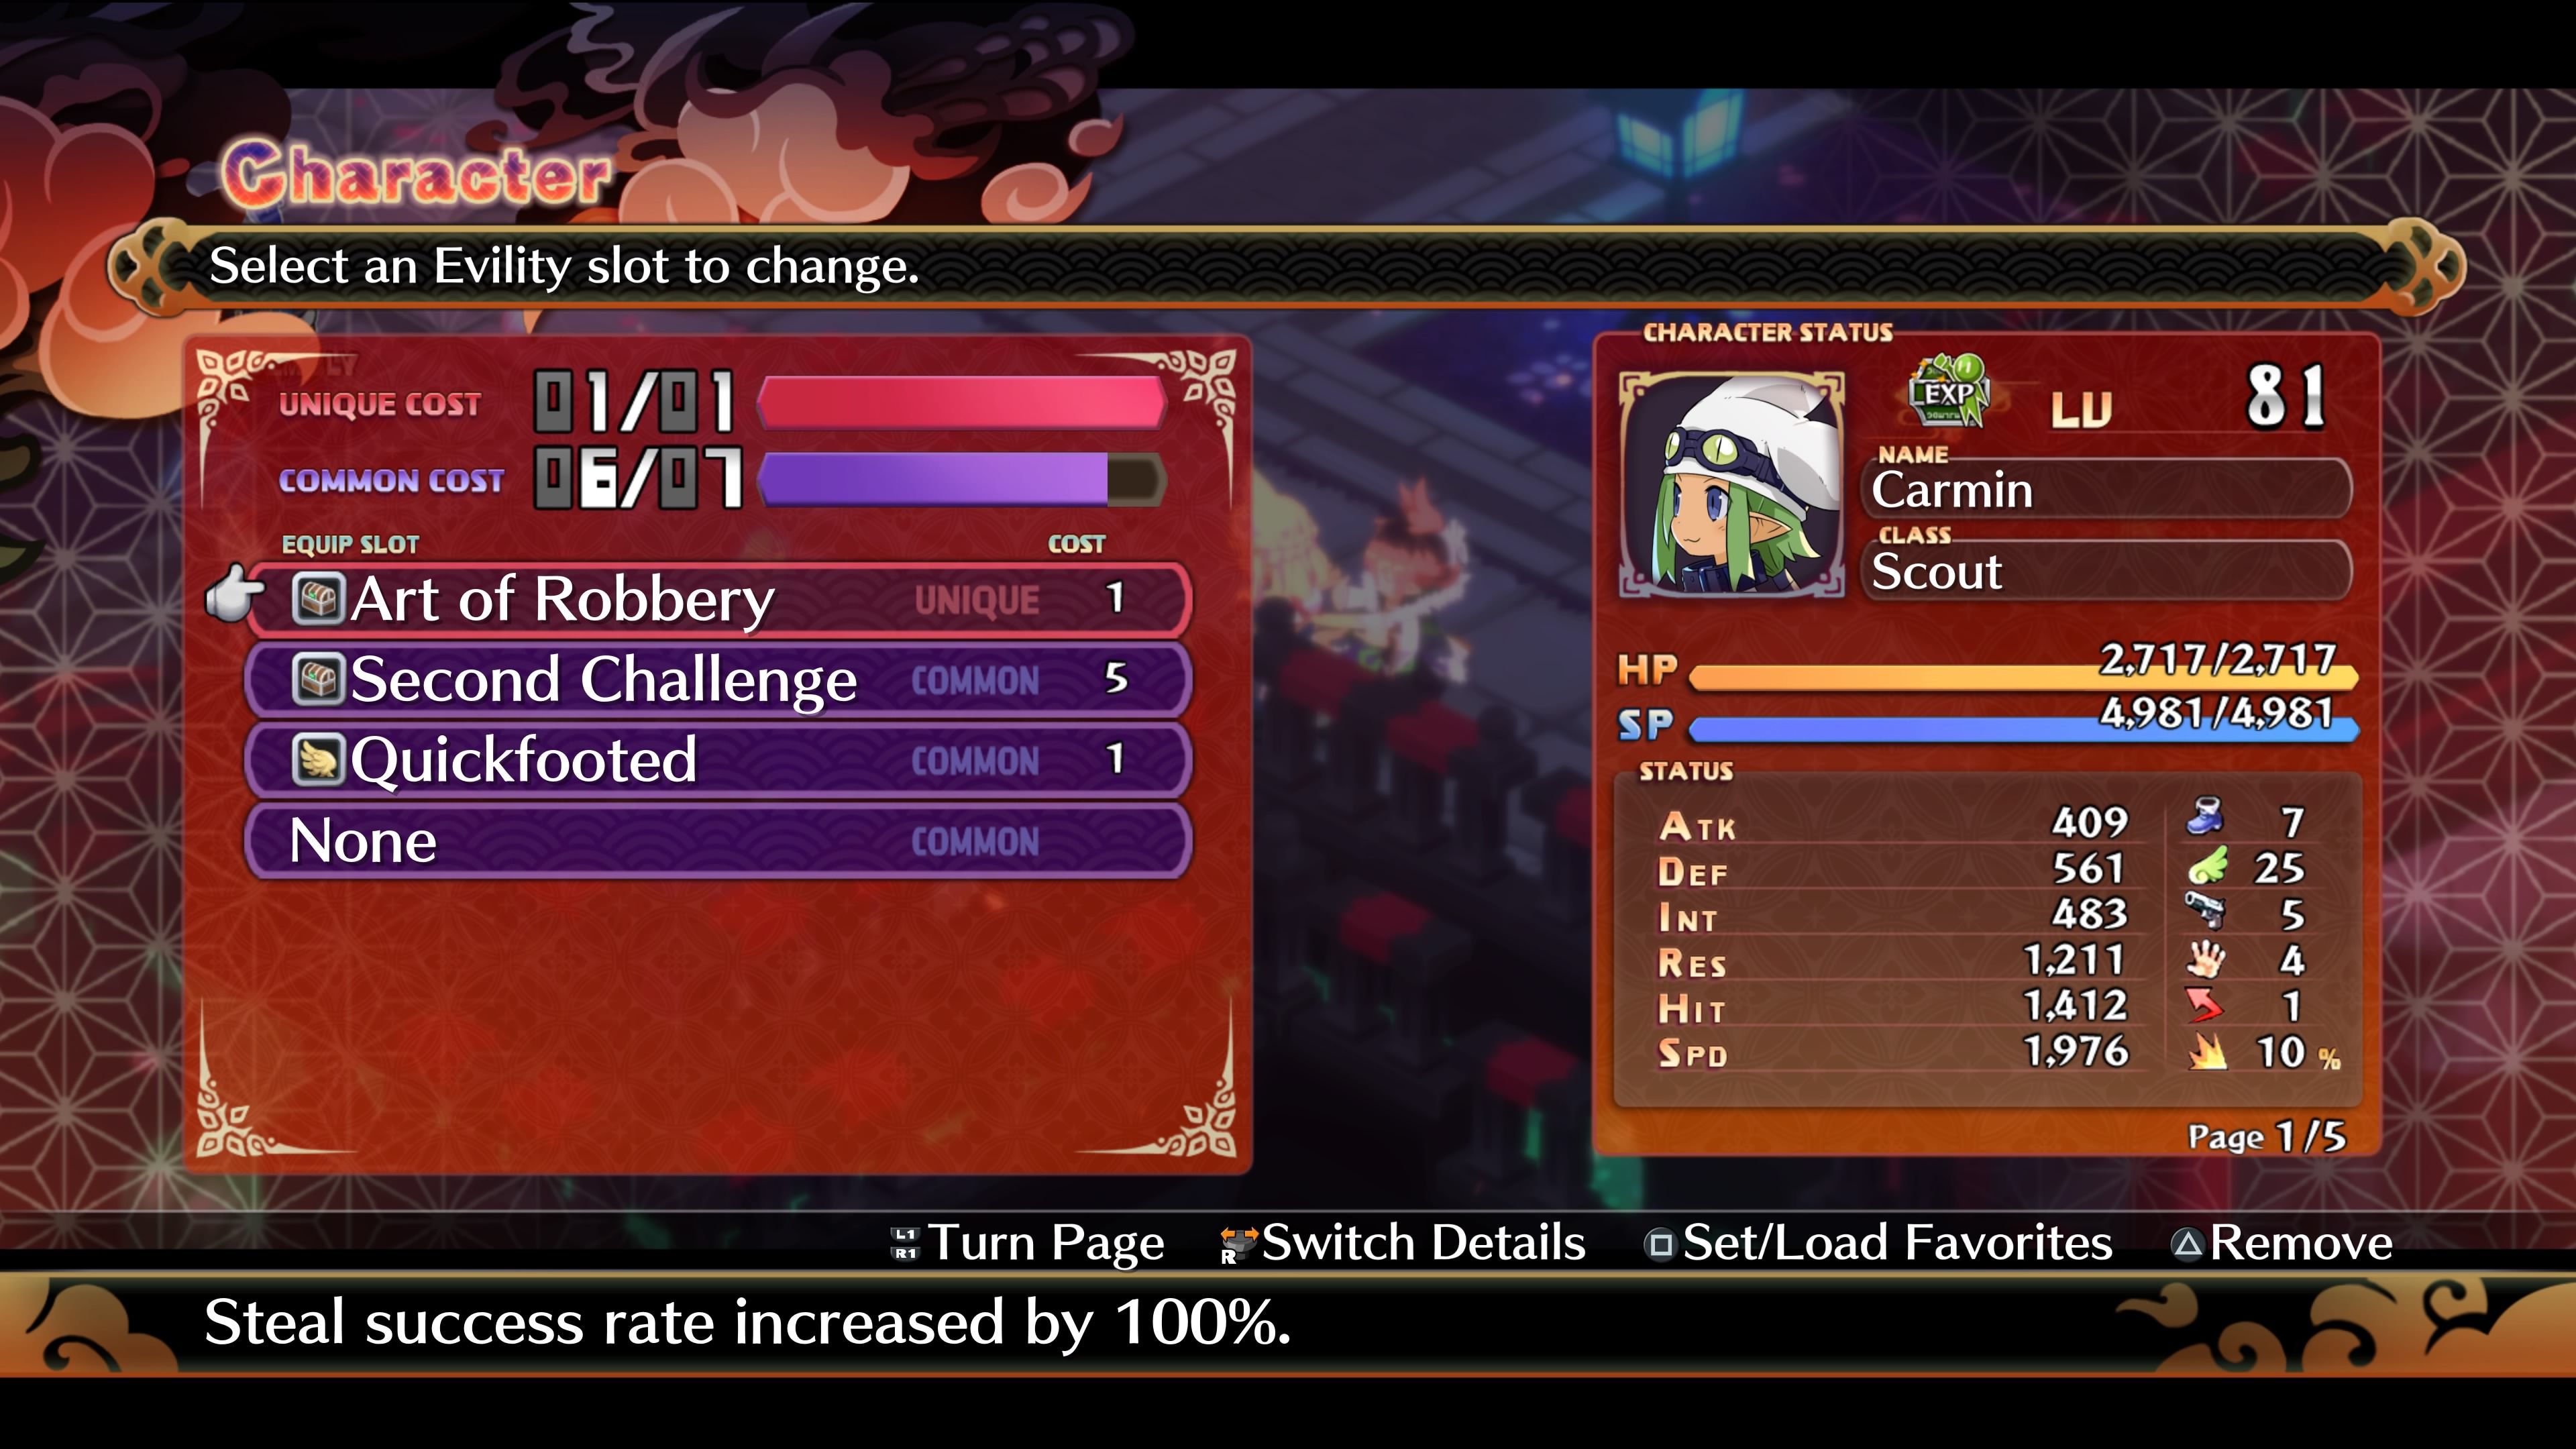 The Evility List for a Thief in Disgaea 7